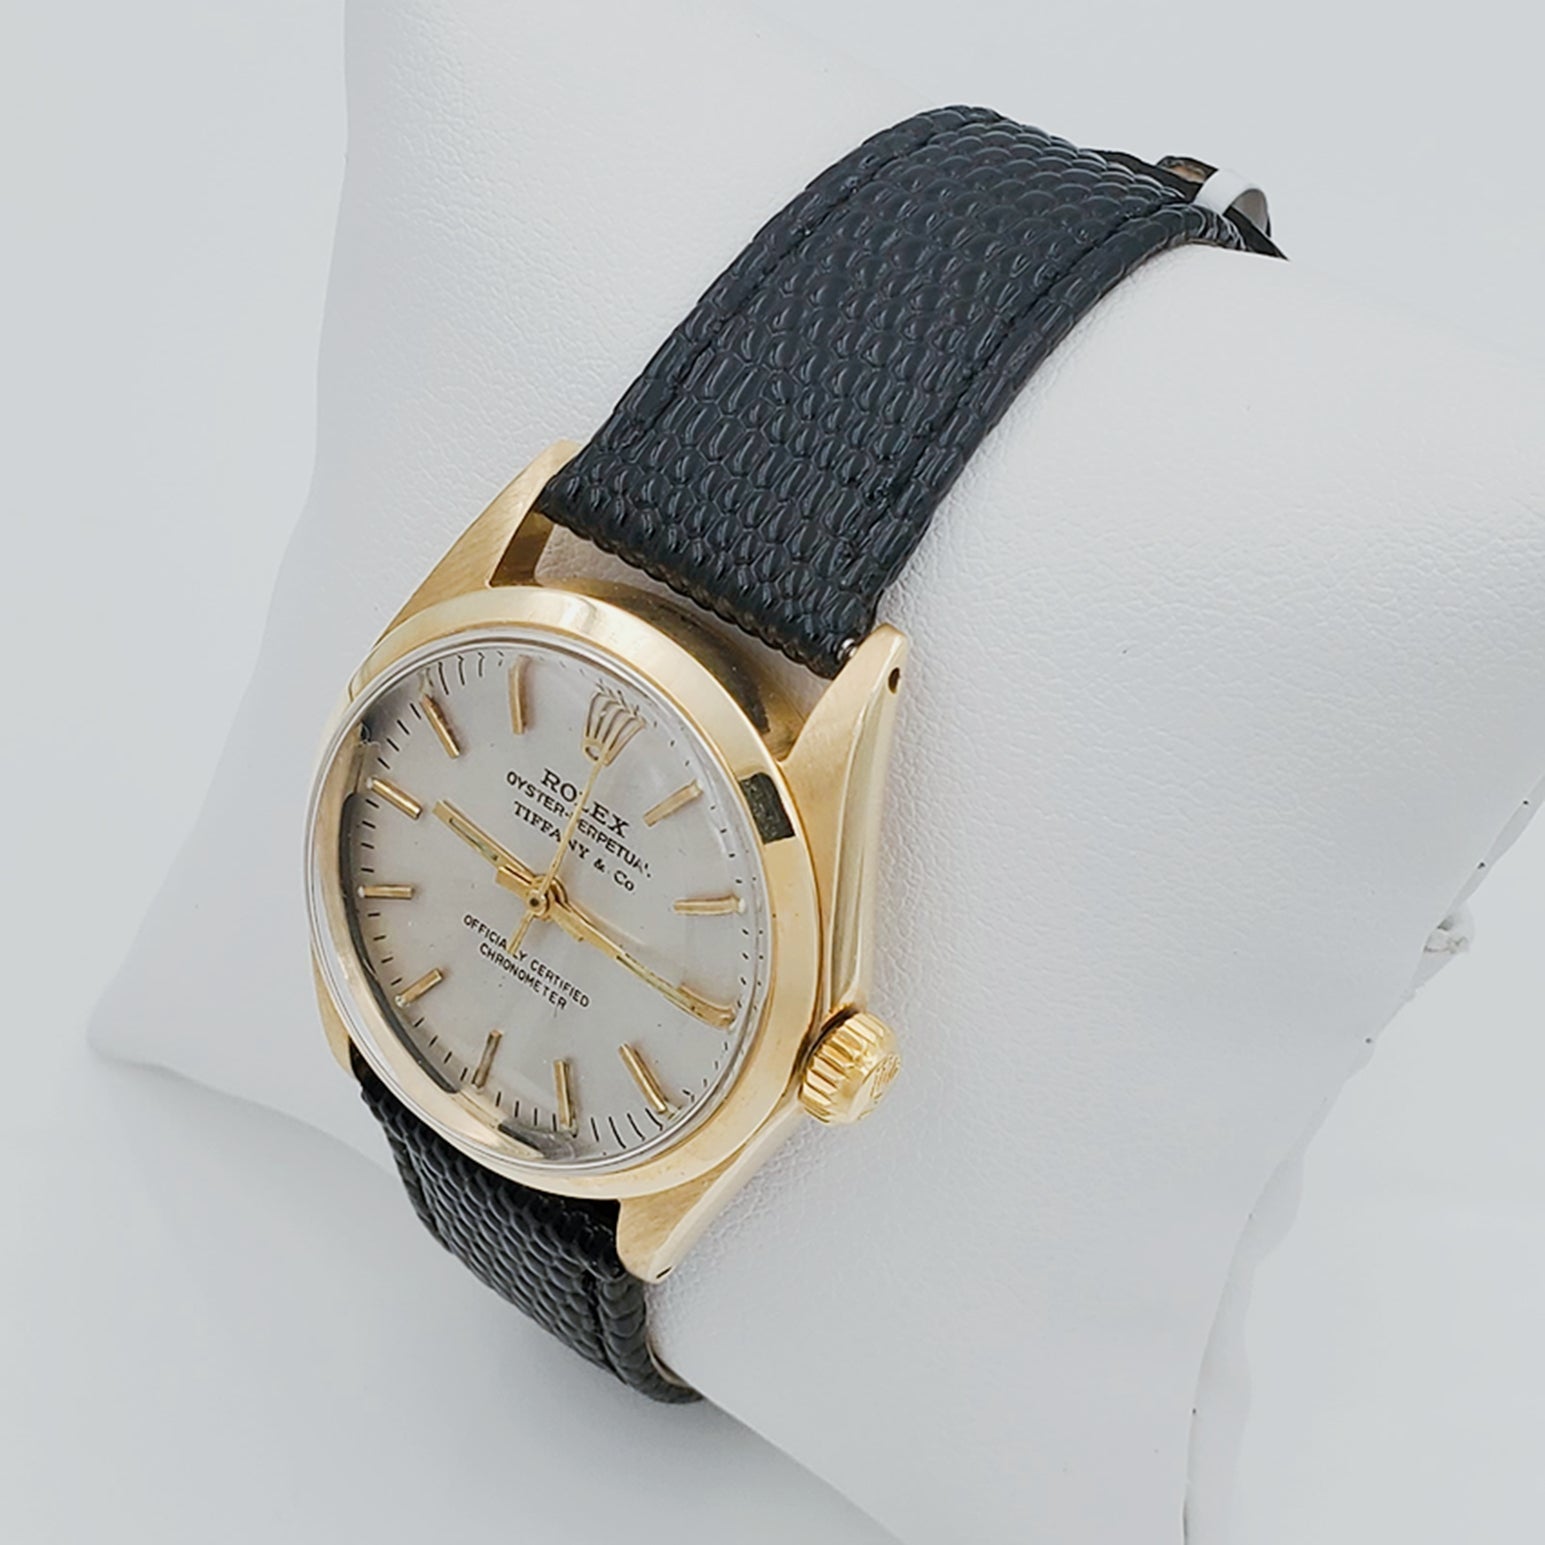 Men's Rolex 30mm Vintage Oyster Perpetual Tiffany 14K Yellow Gold Watch with Black Leather Strap and Off-White Dial. (Pre-Owned)